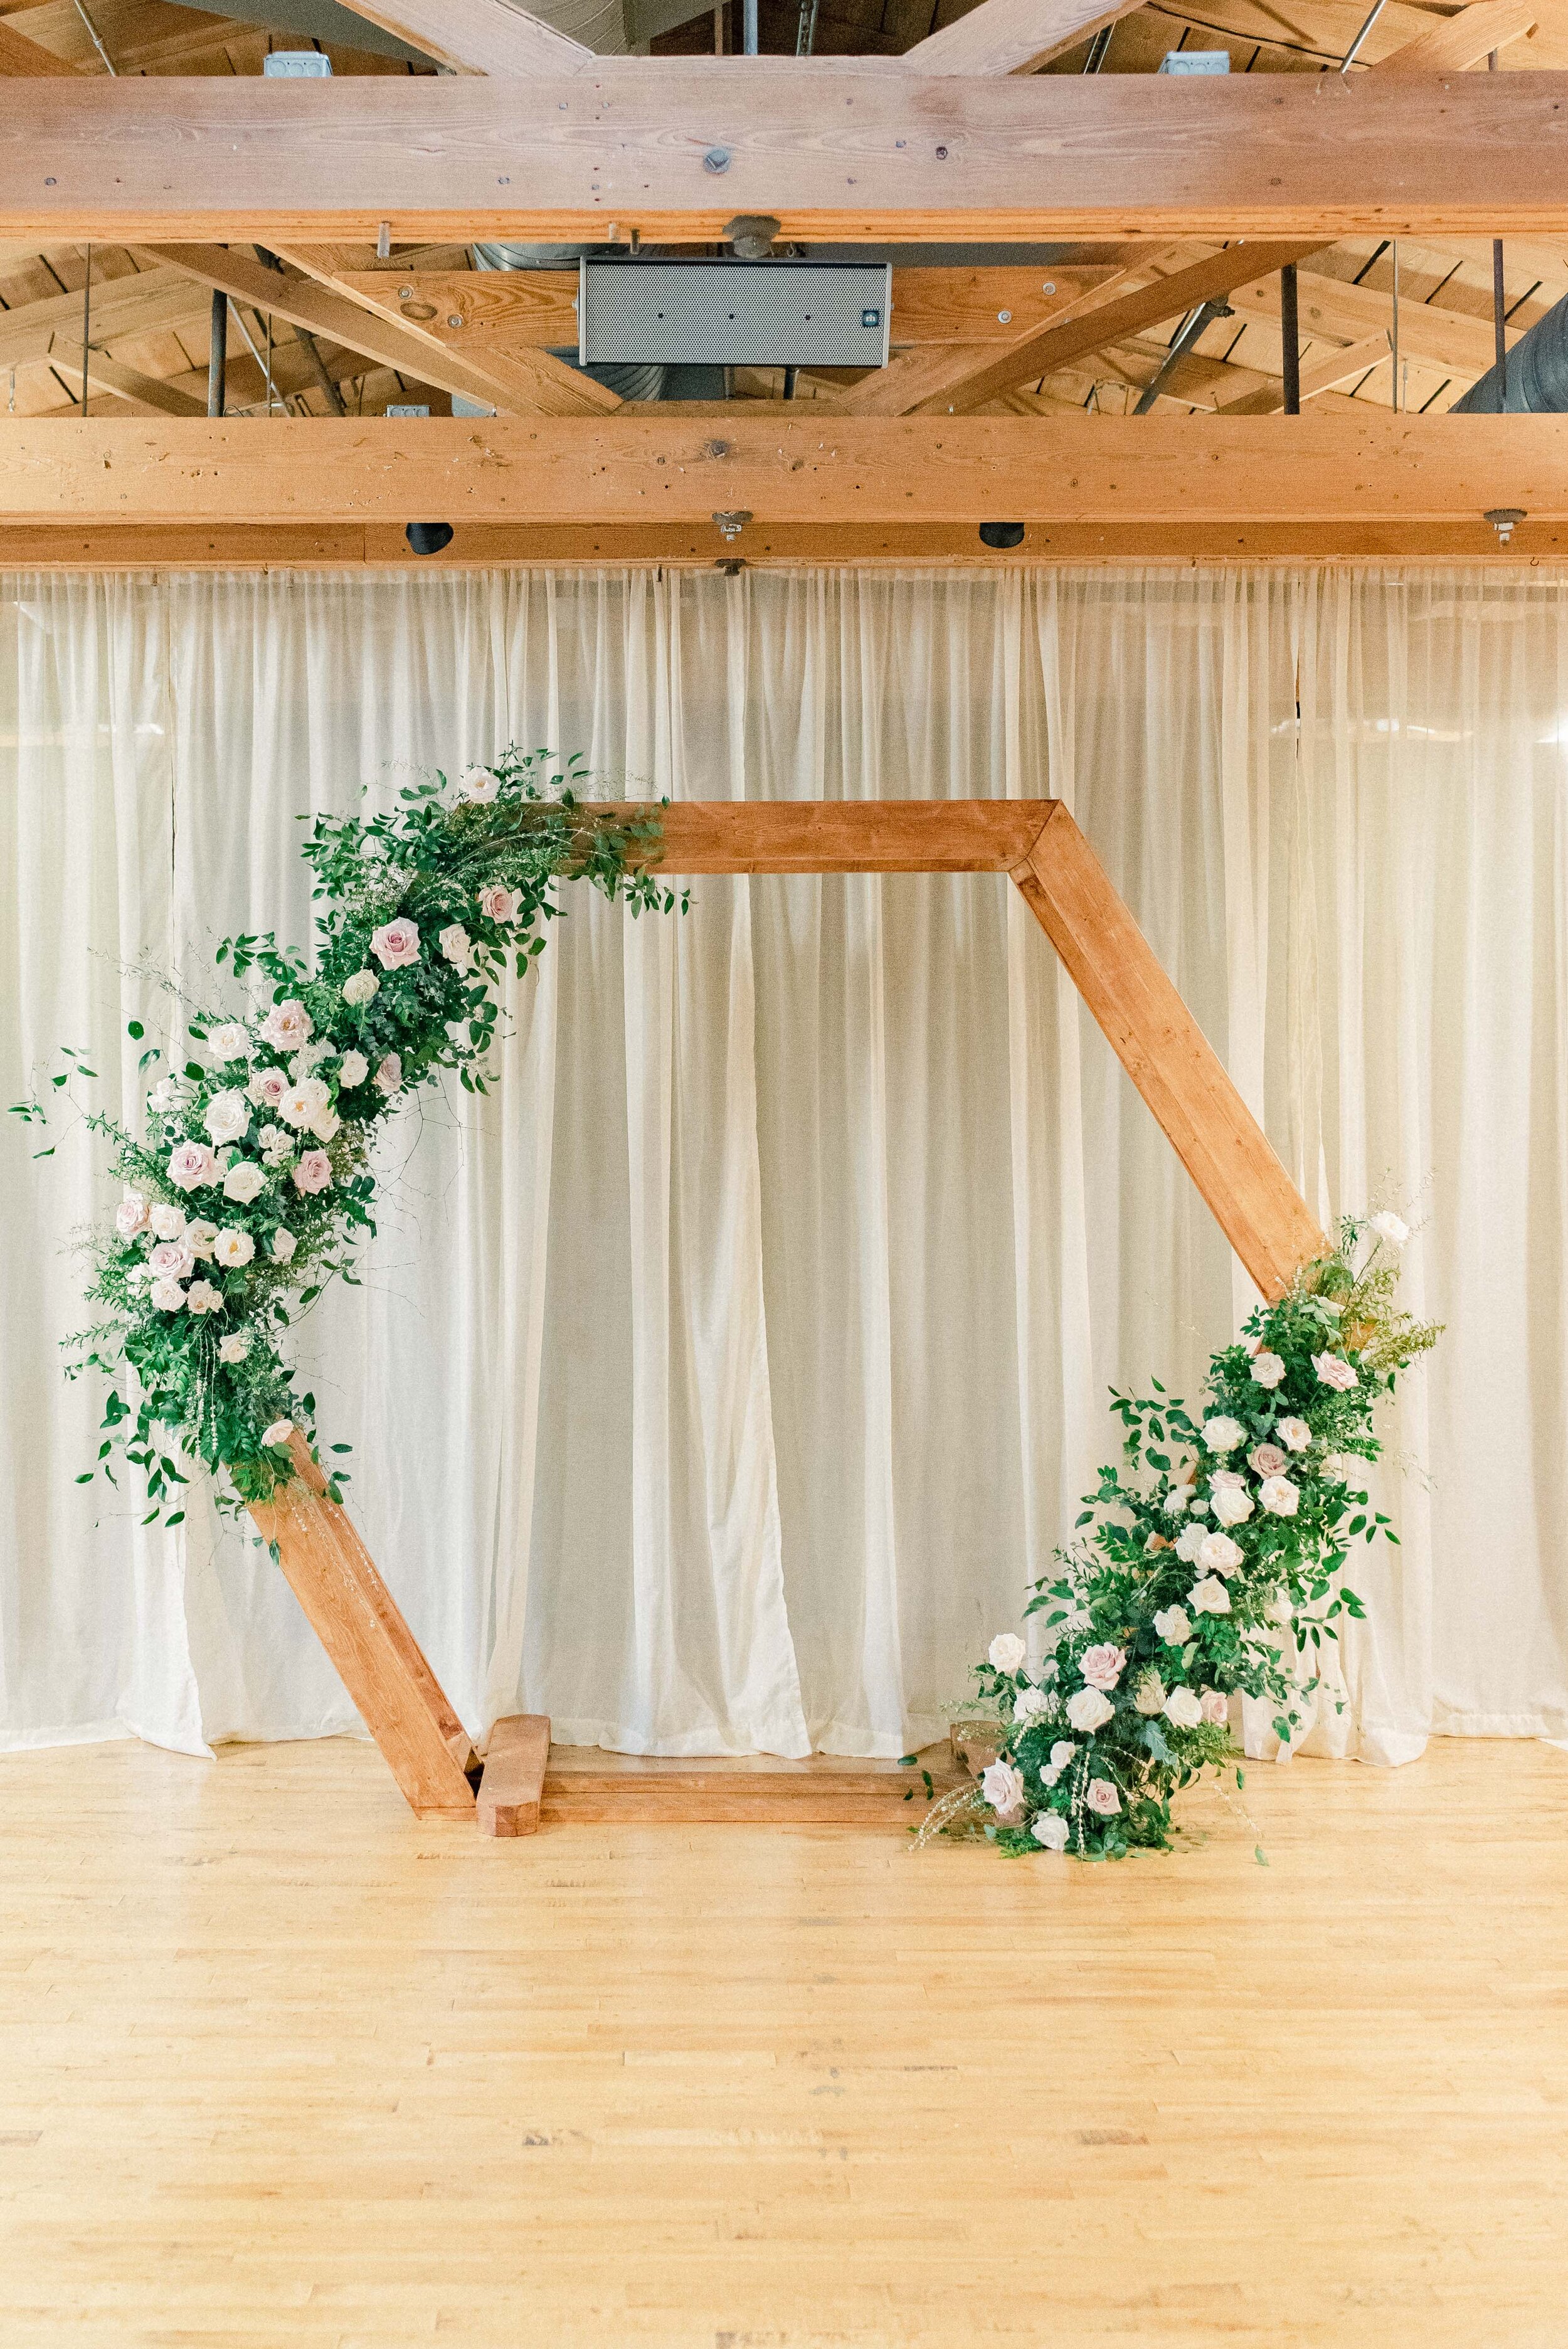 A hexagon arch makes the perfect ceremony backdrop. Blooms used here are blush quicksand roses, cream garden roses, white ranunculus, spray roses, and lush greenery. Designed by florist Rosemary & Finch in Nashville, TN.